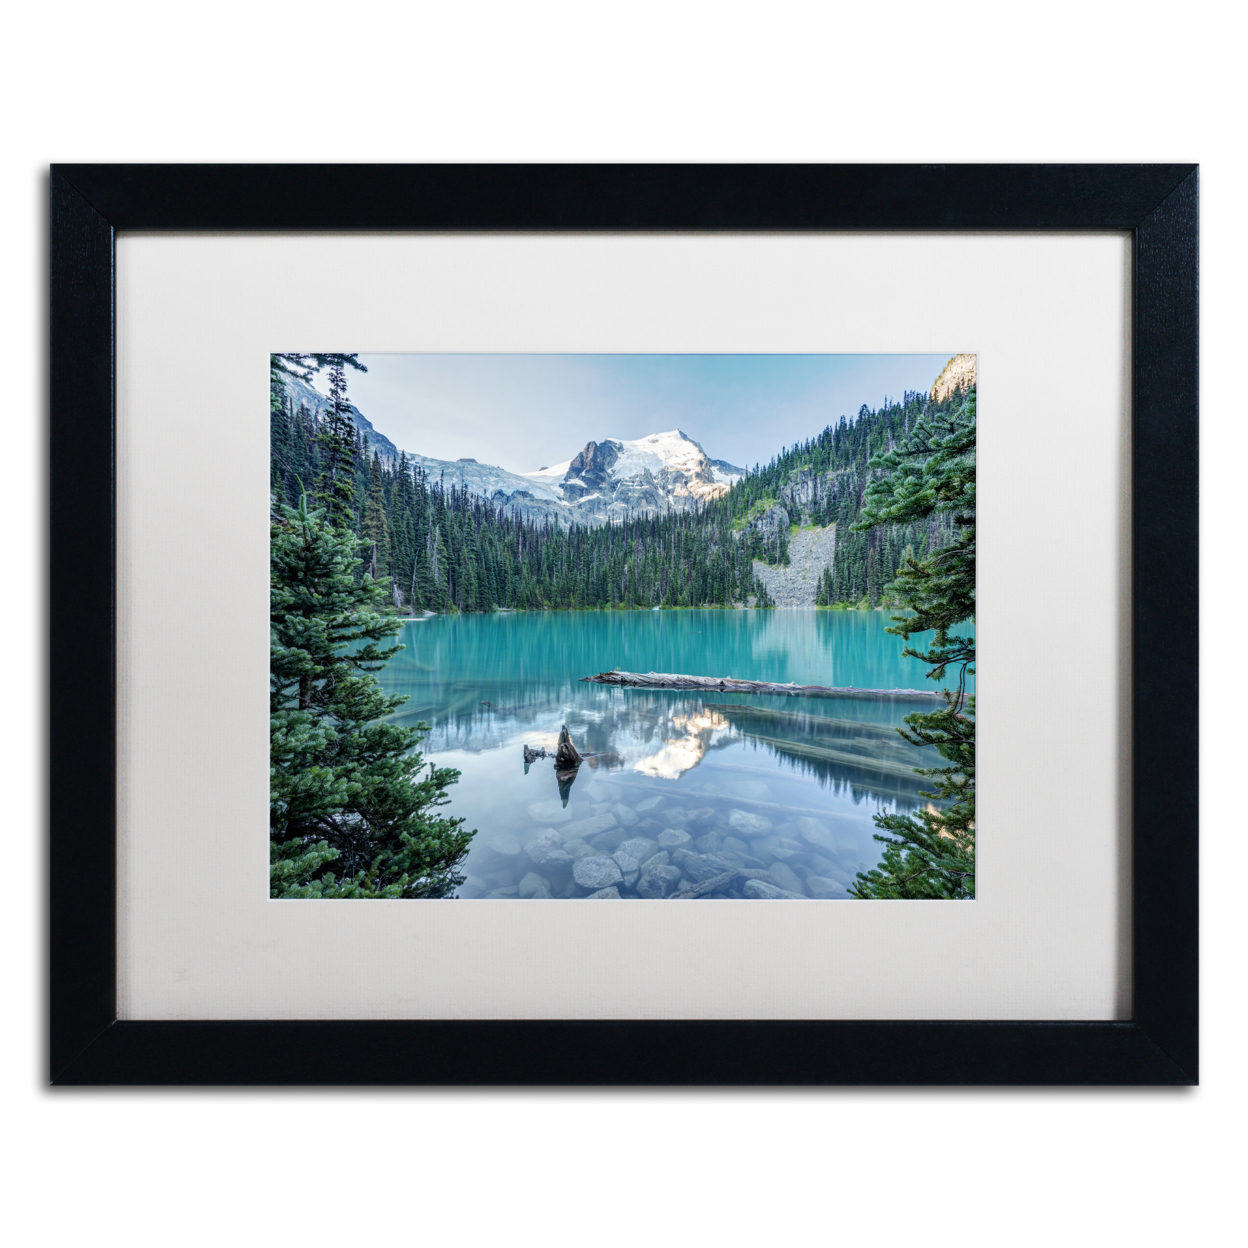 Pierre Leclerc 'Natural Beautiful British Columbia' Black Wooden Framed Art 18 X 22 Inches